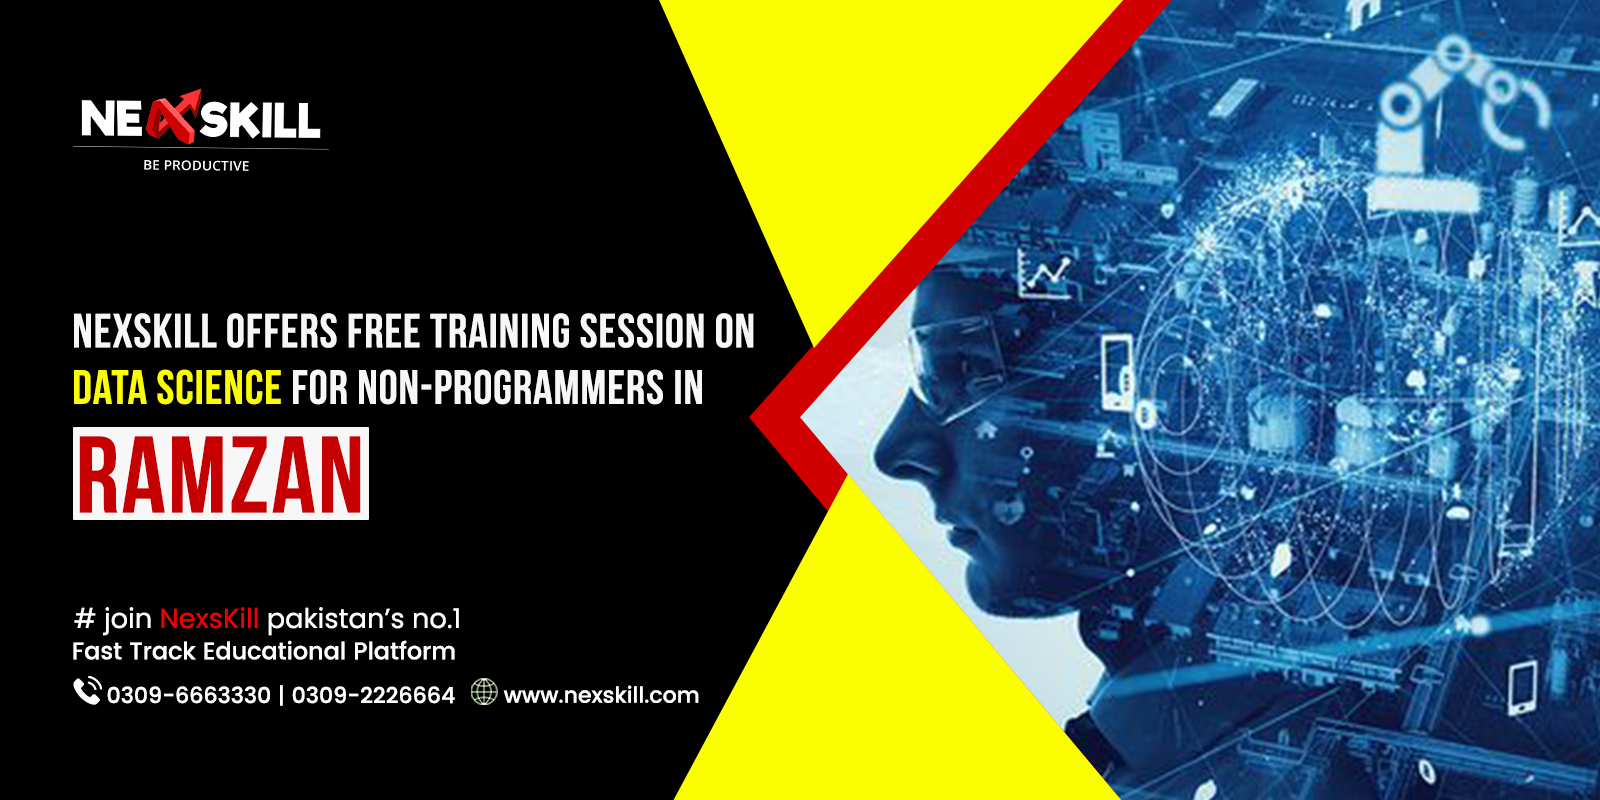 Nexskill offers Free Training Session on Data Science for Non-Programmers in Ramzan